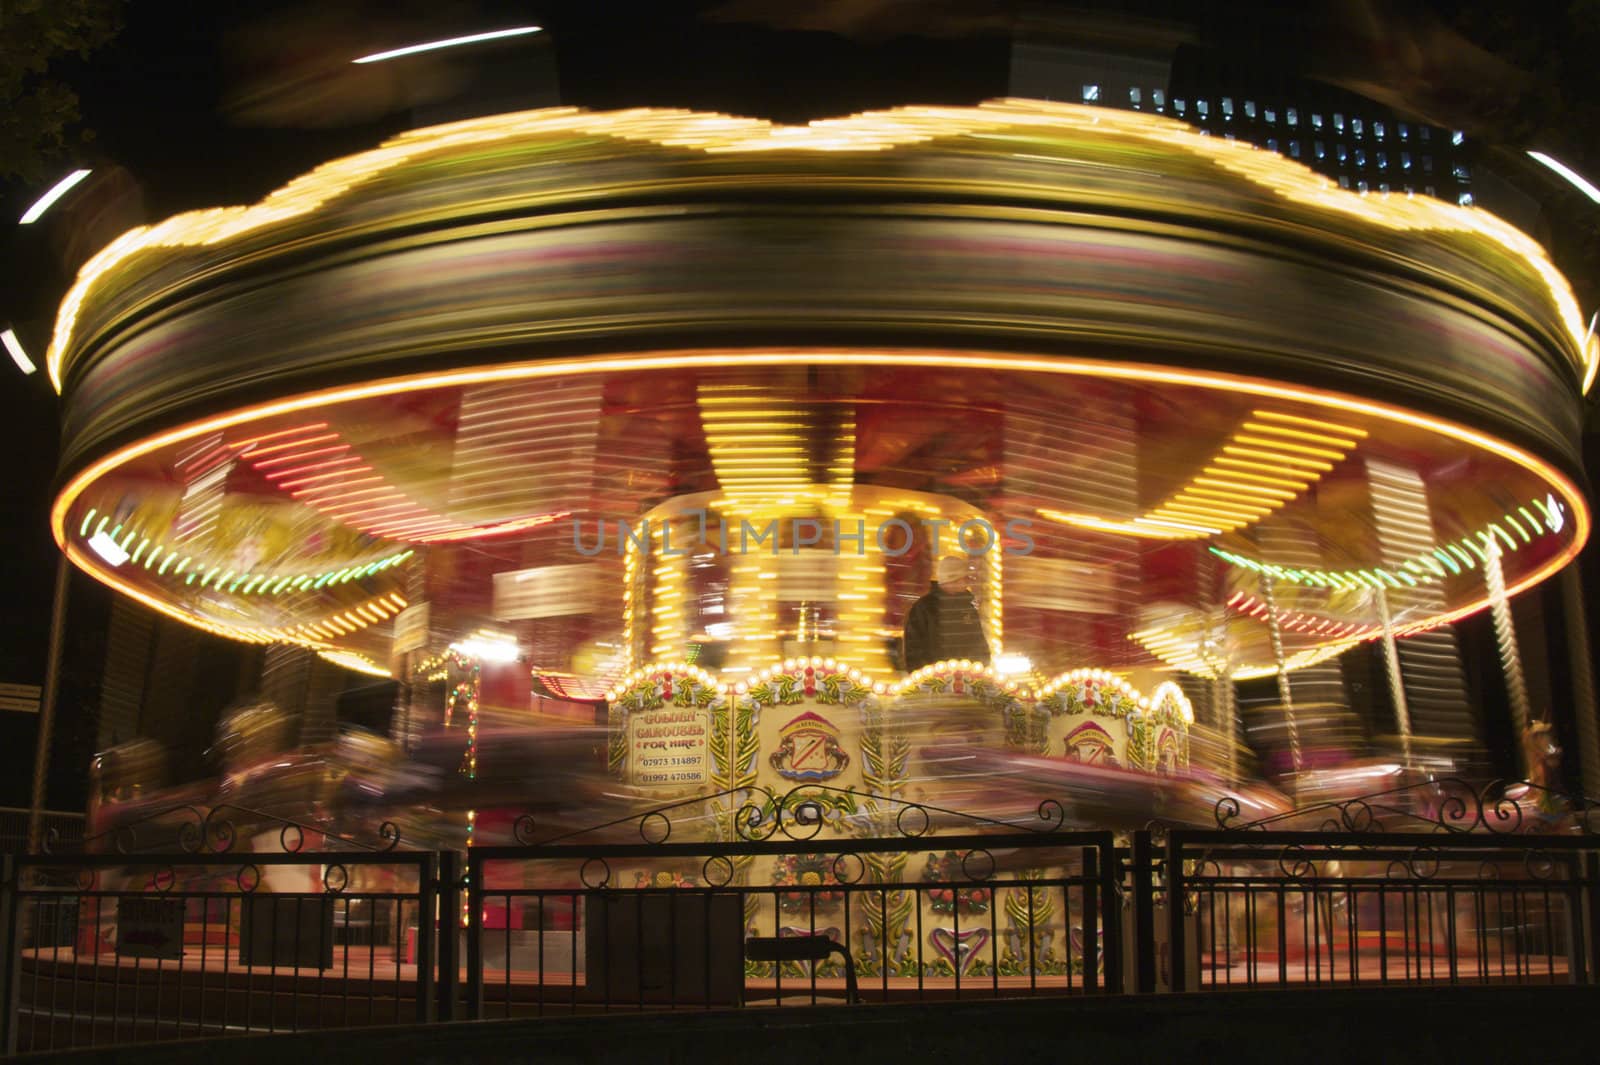 Spinning merry-go-round - 1/4 second exposure.